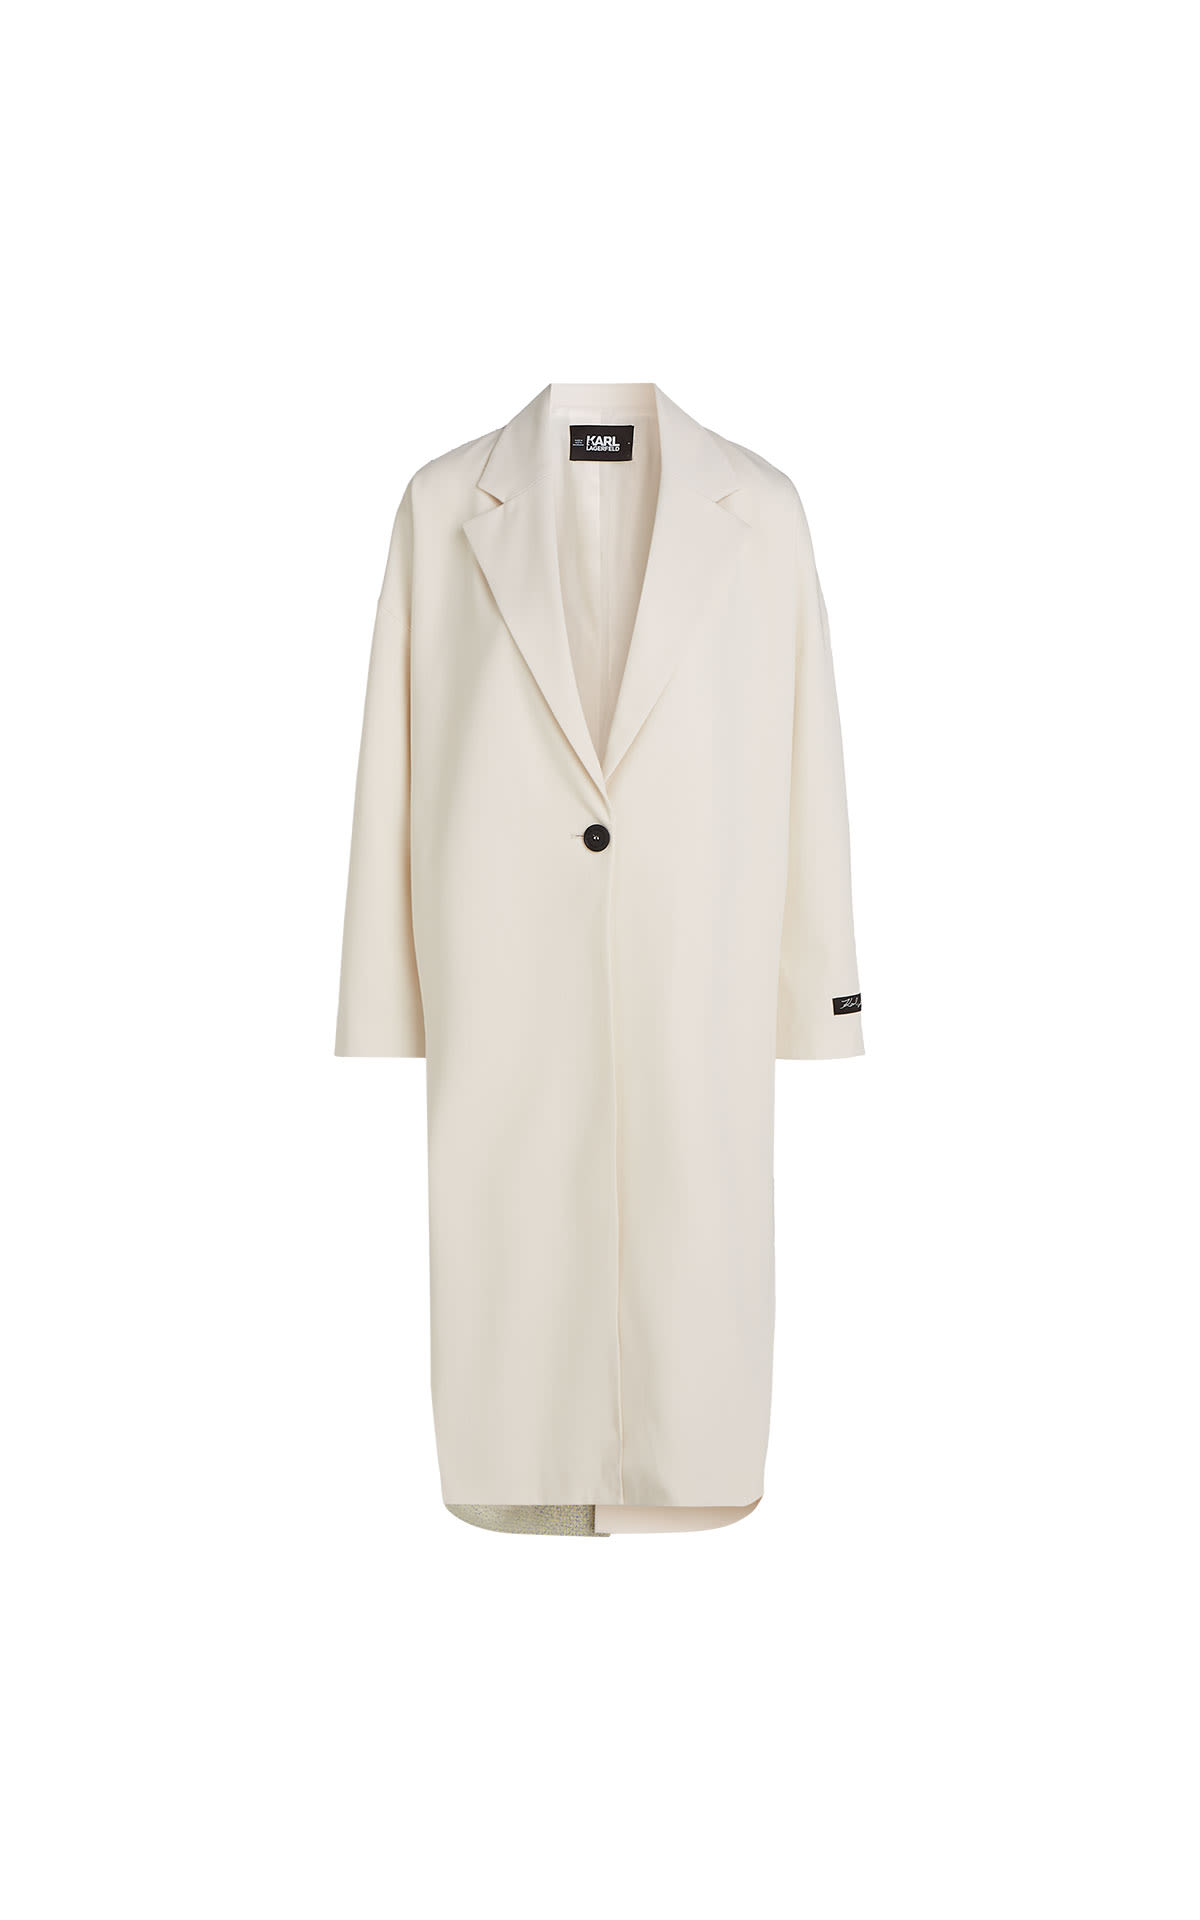 KARL LAGERFELD Boucle tonal summer coat  from Bicester Village